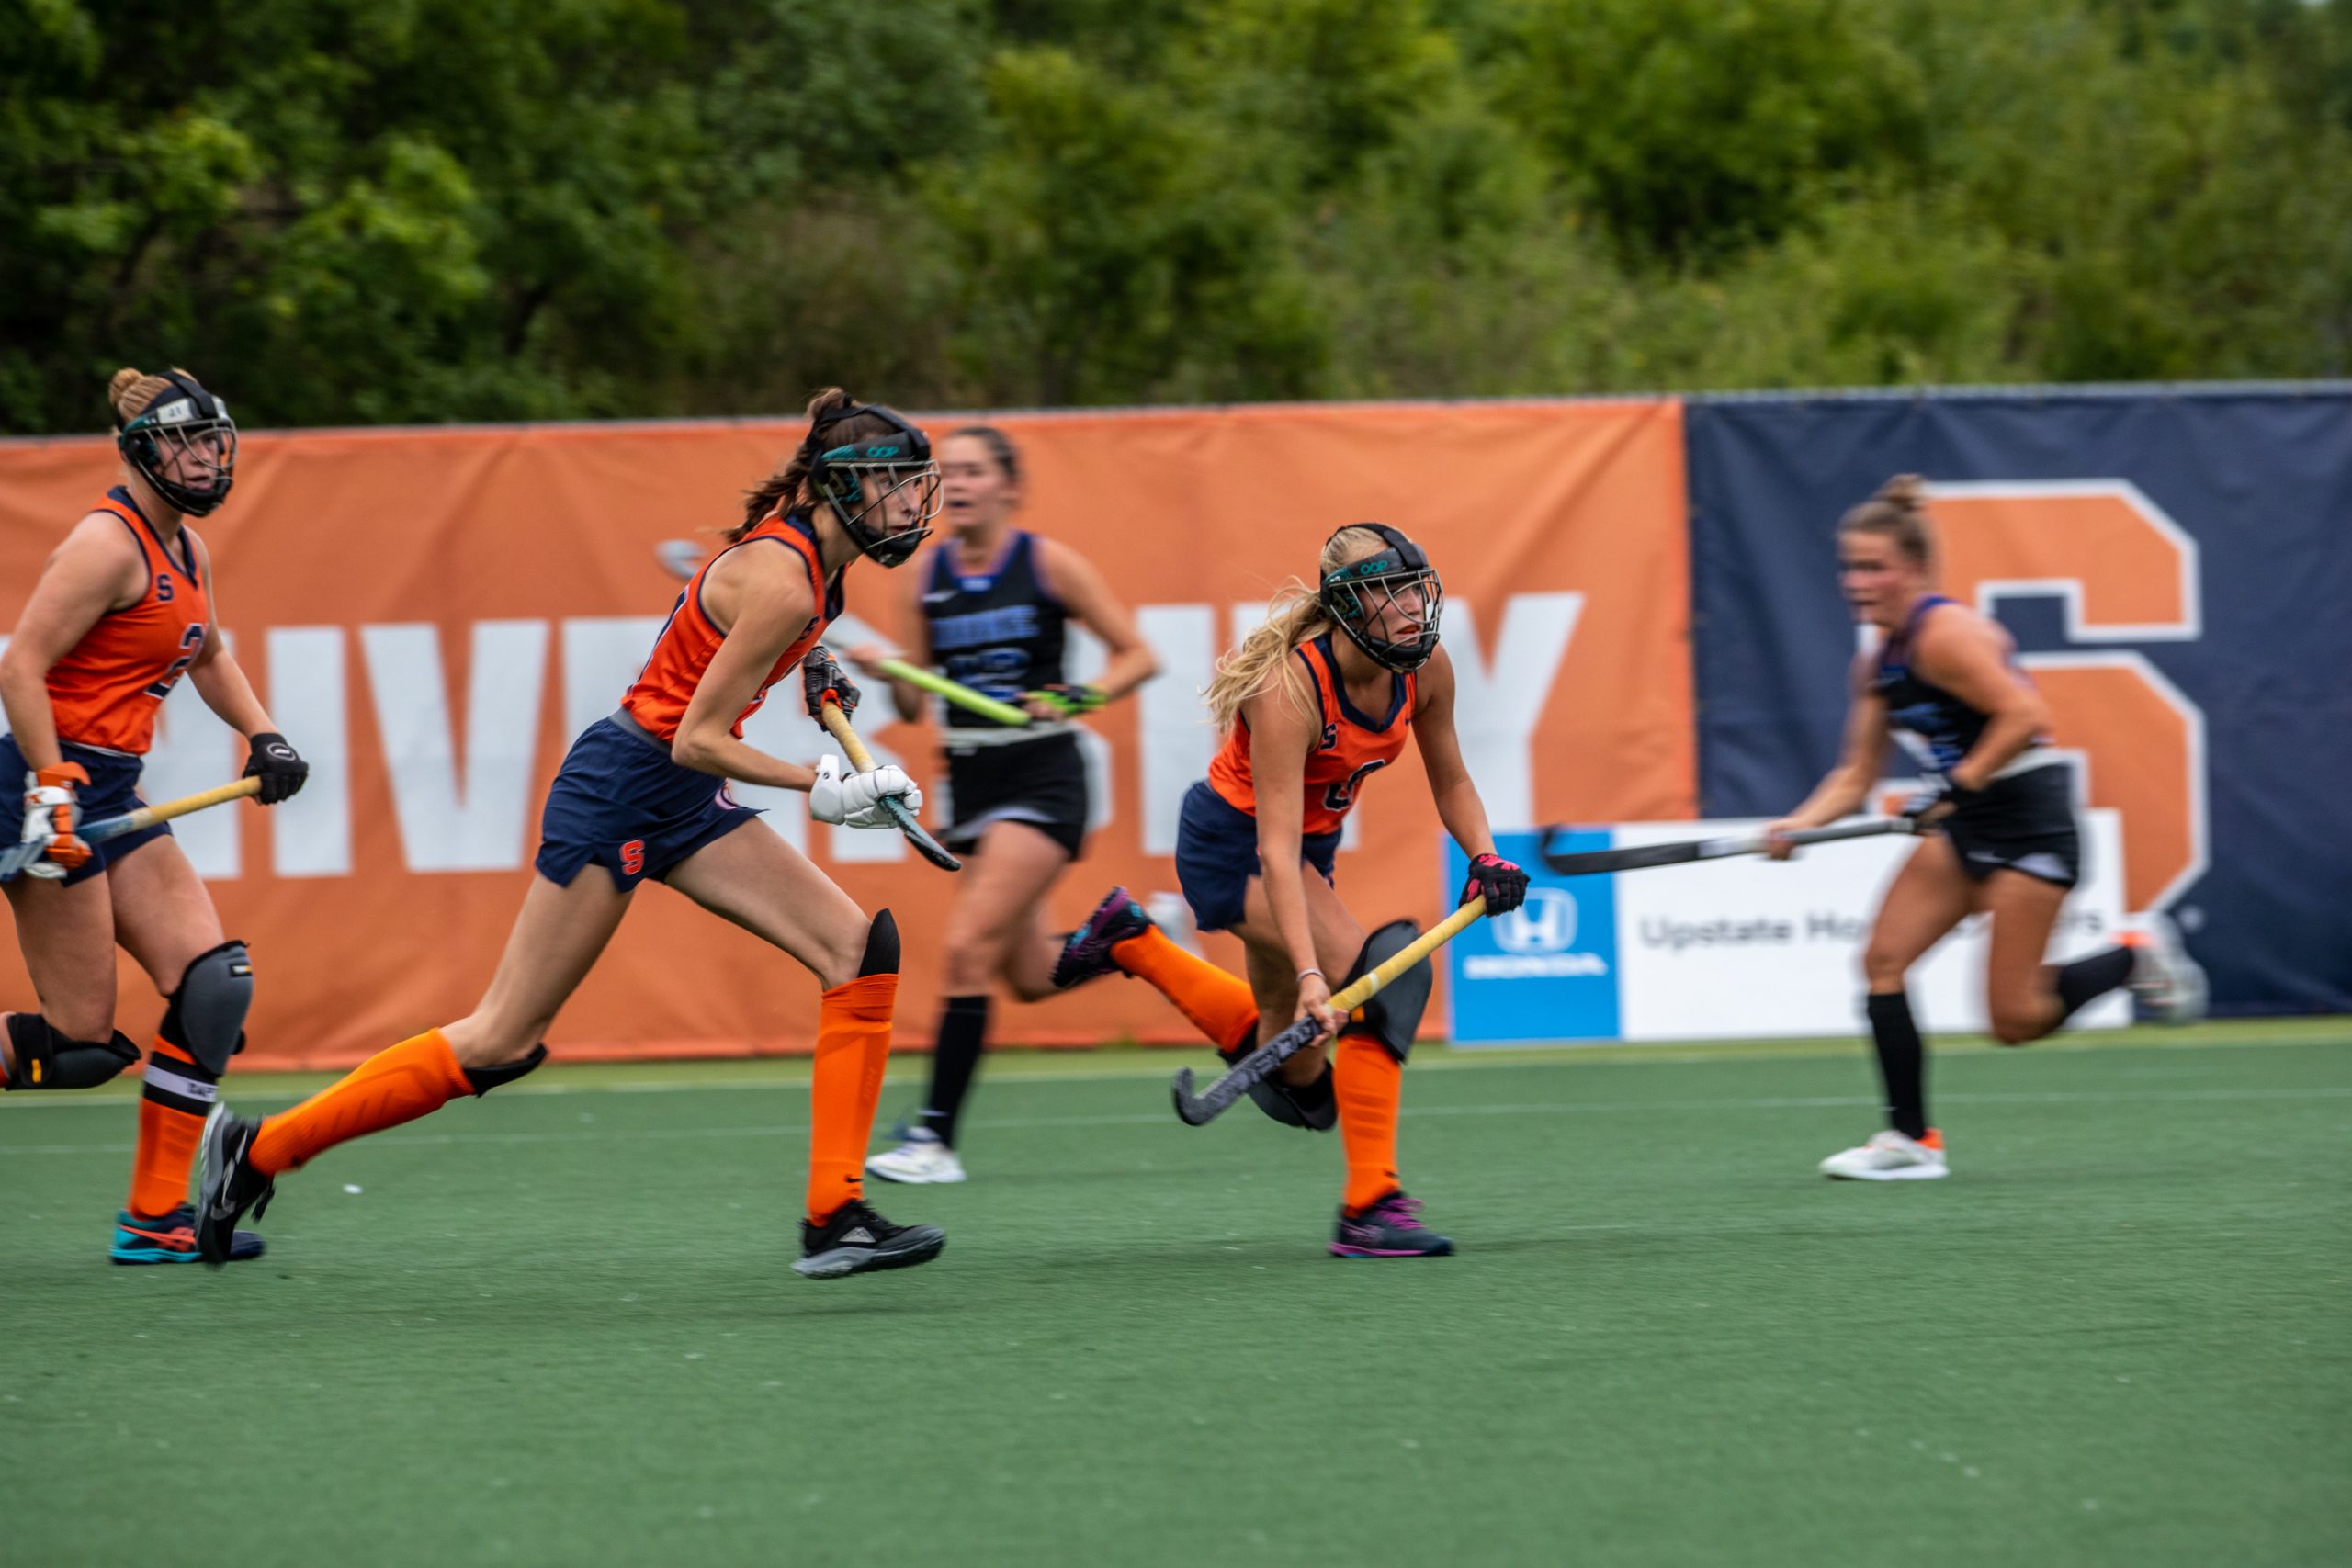 Syracuse Field Hockey players guard a penalty corner during a game on Friday, September 16, 2022.